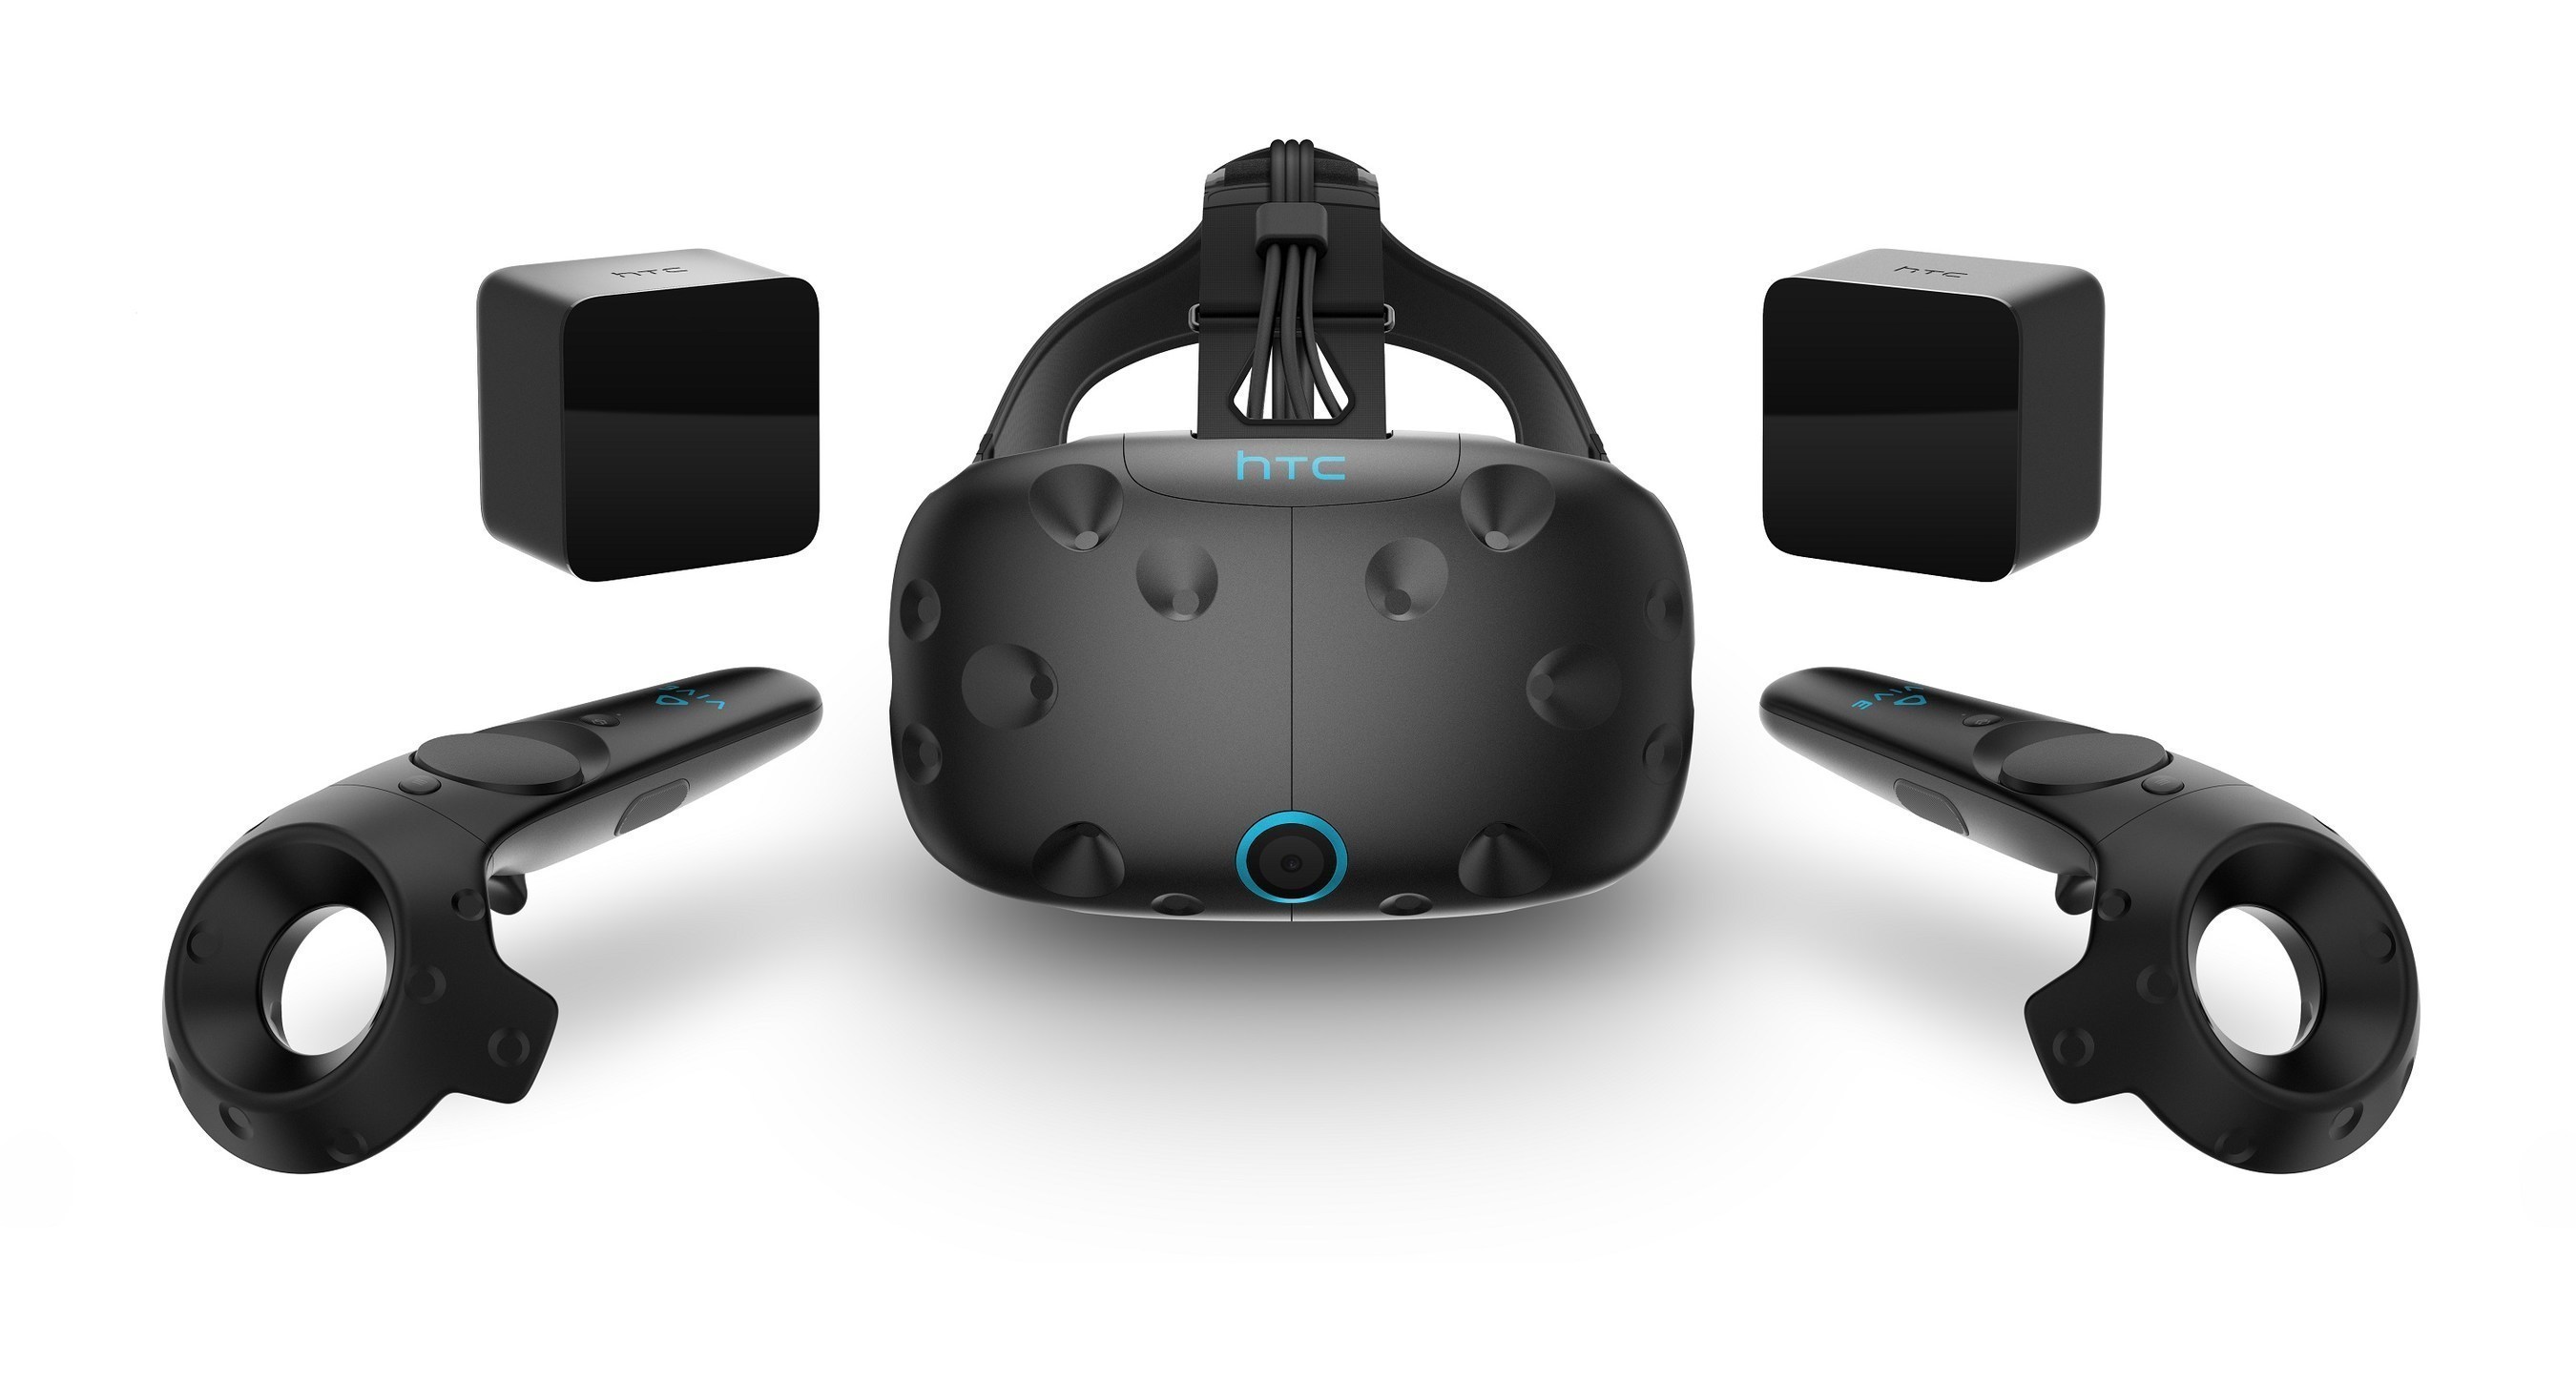 HTC announces new service to drive business uses of VR with HTC Vive